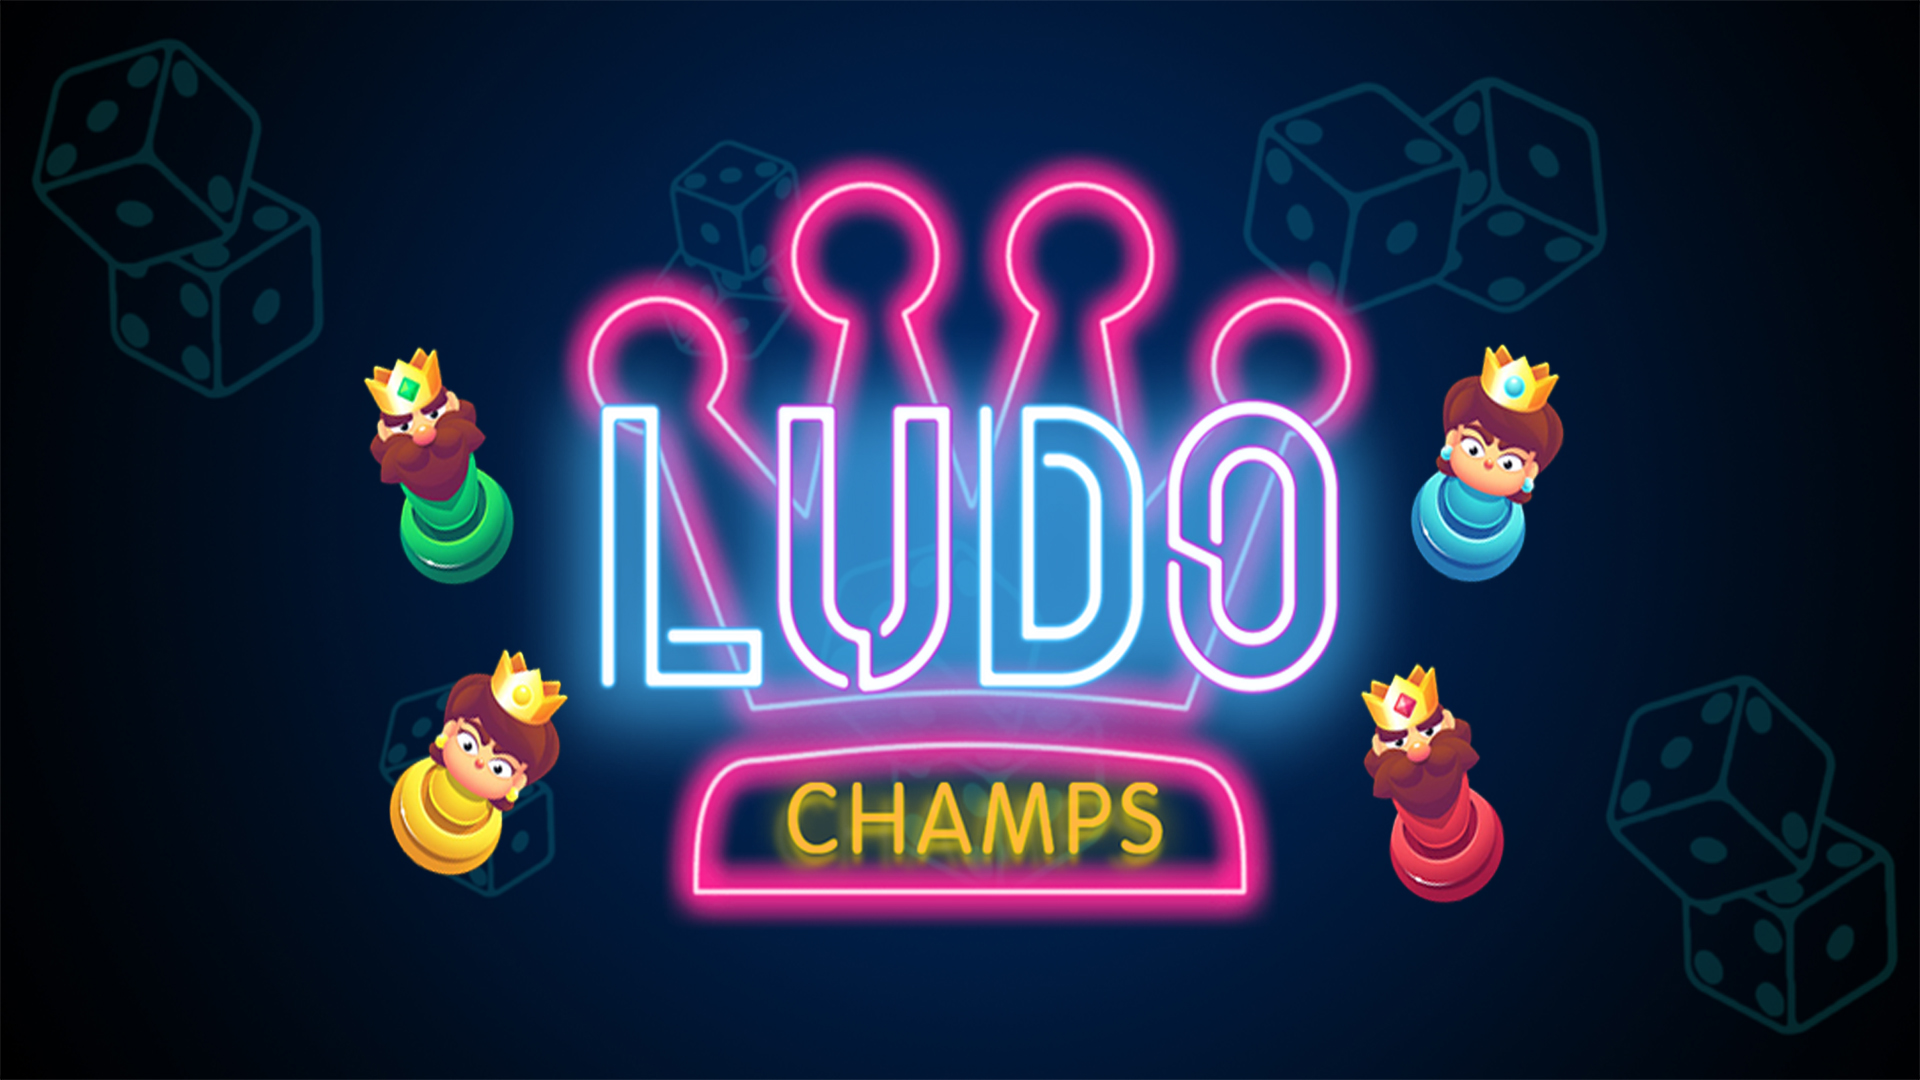 Ludo Game Ui Board Projects :: Photos, videos, logos, illustrations and  branding :: Behance